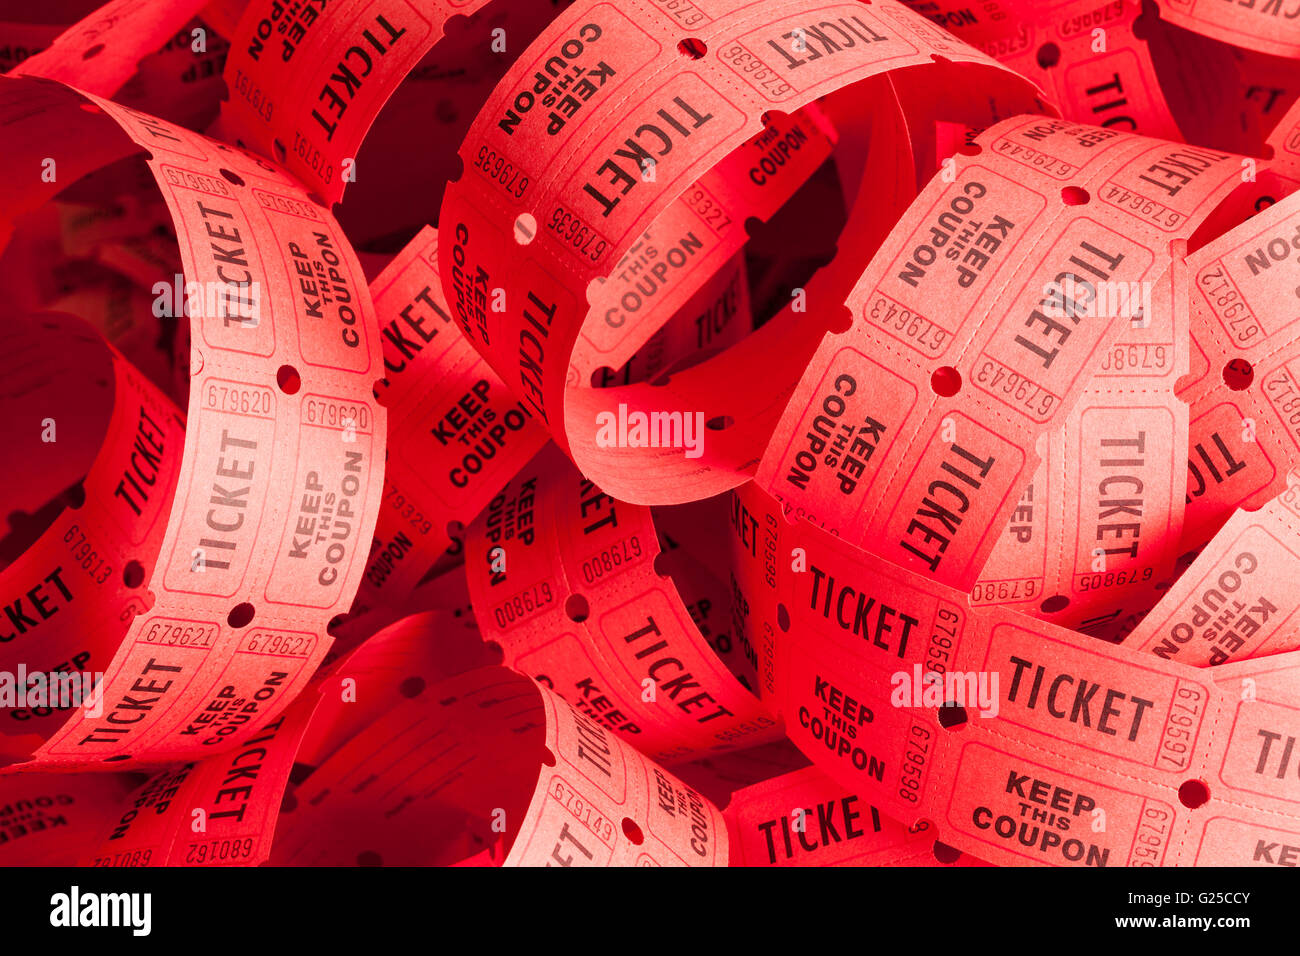 Unwound Messy Roll of Red Tickets Piled Up. Stock Photo